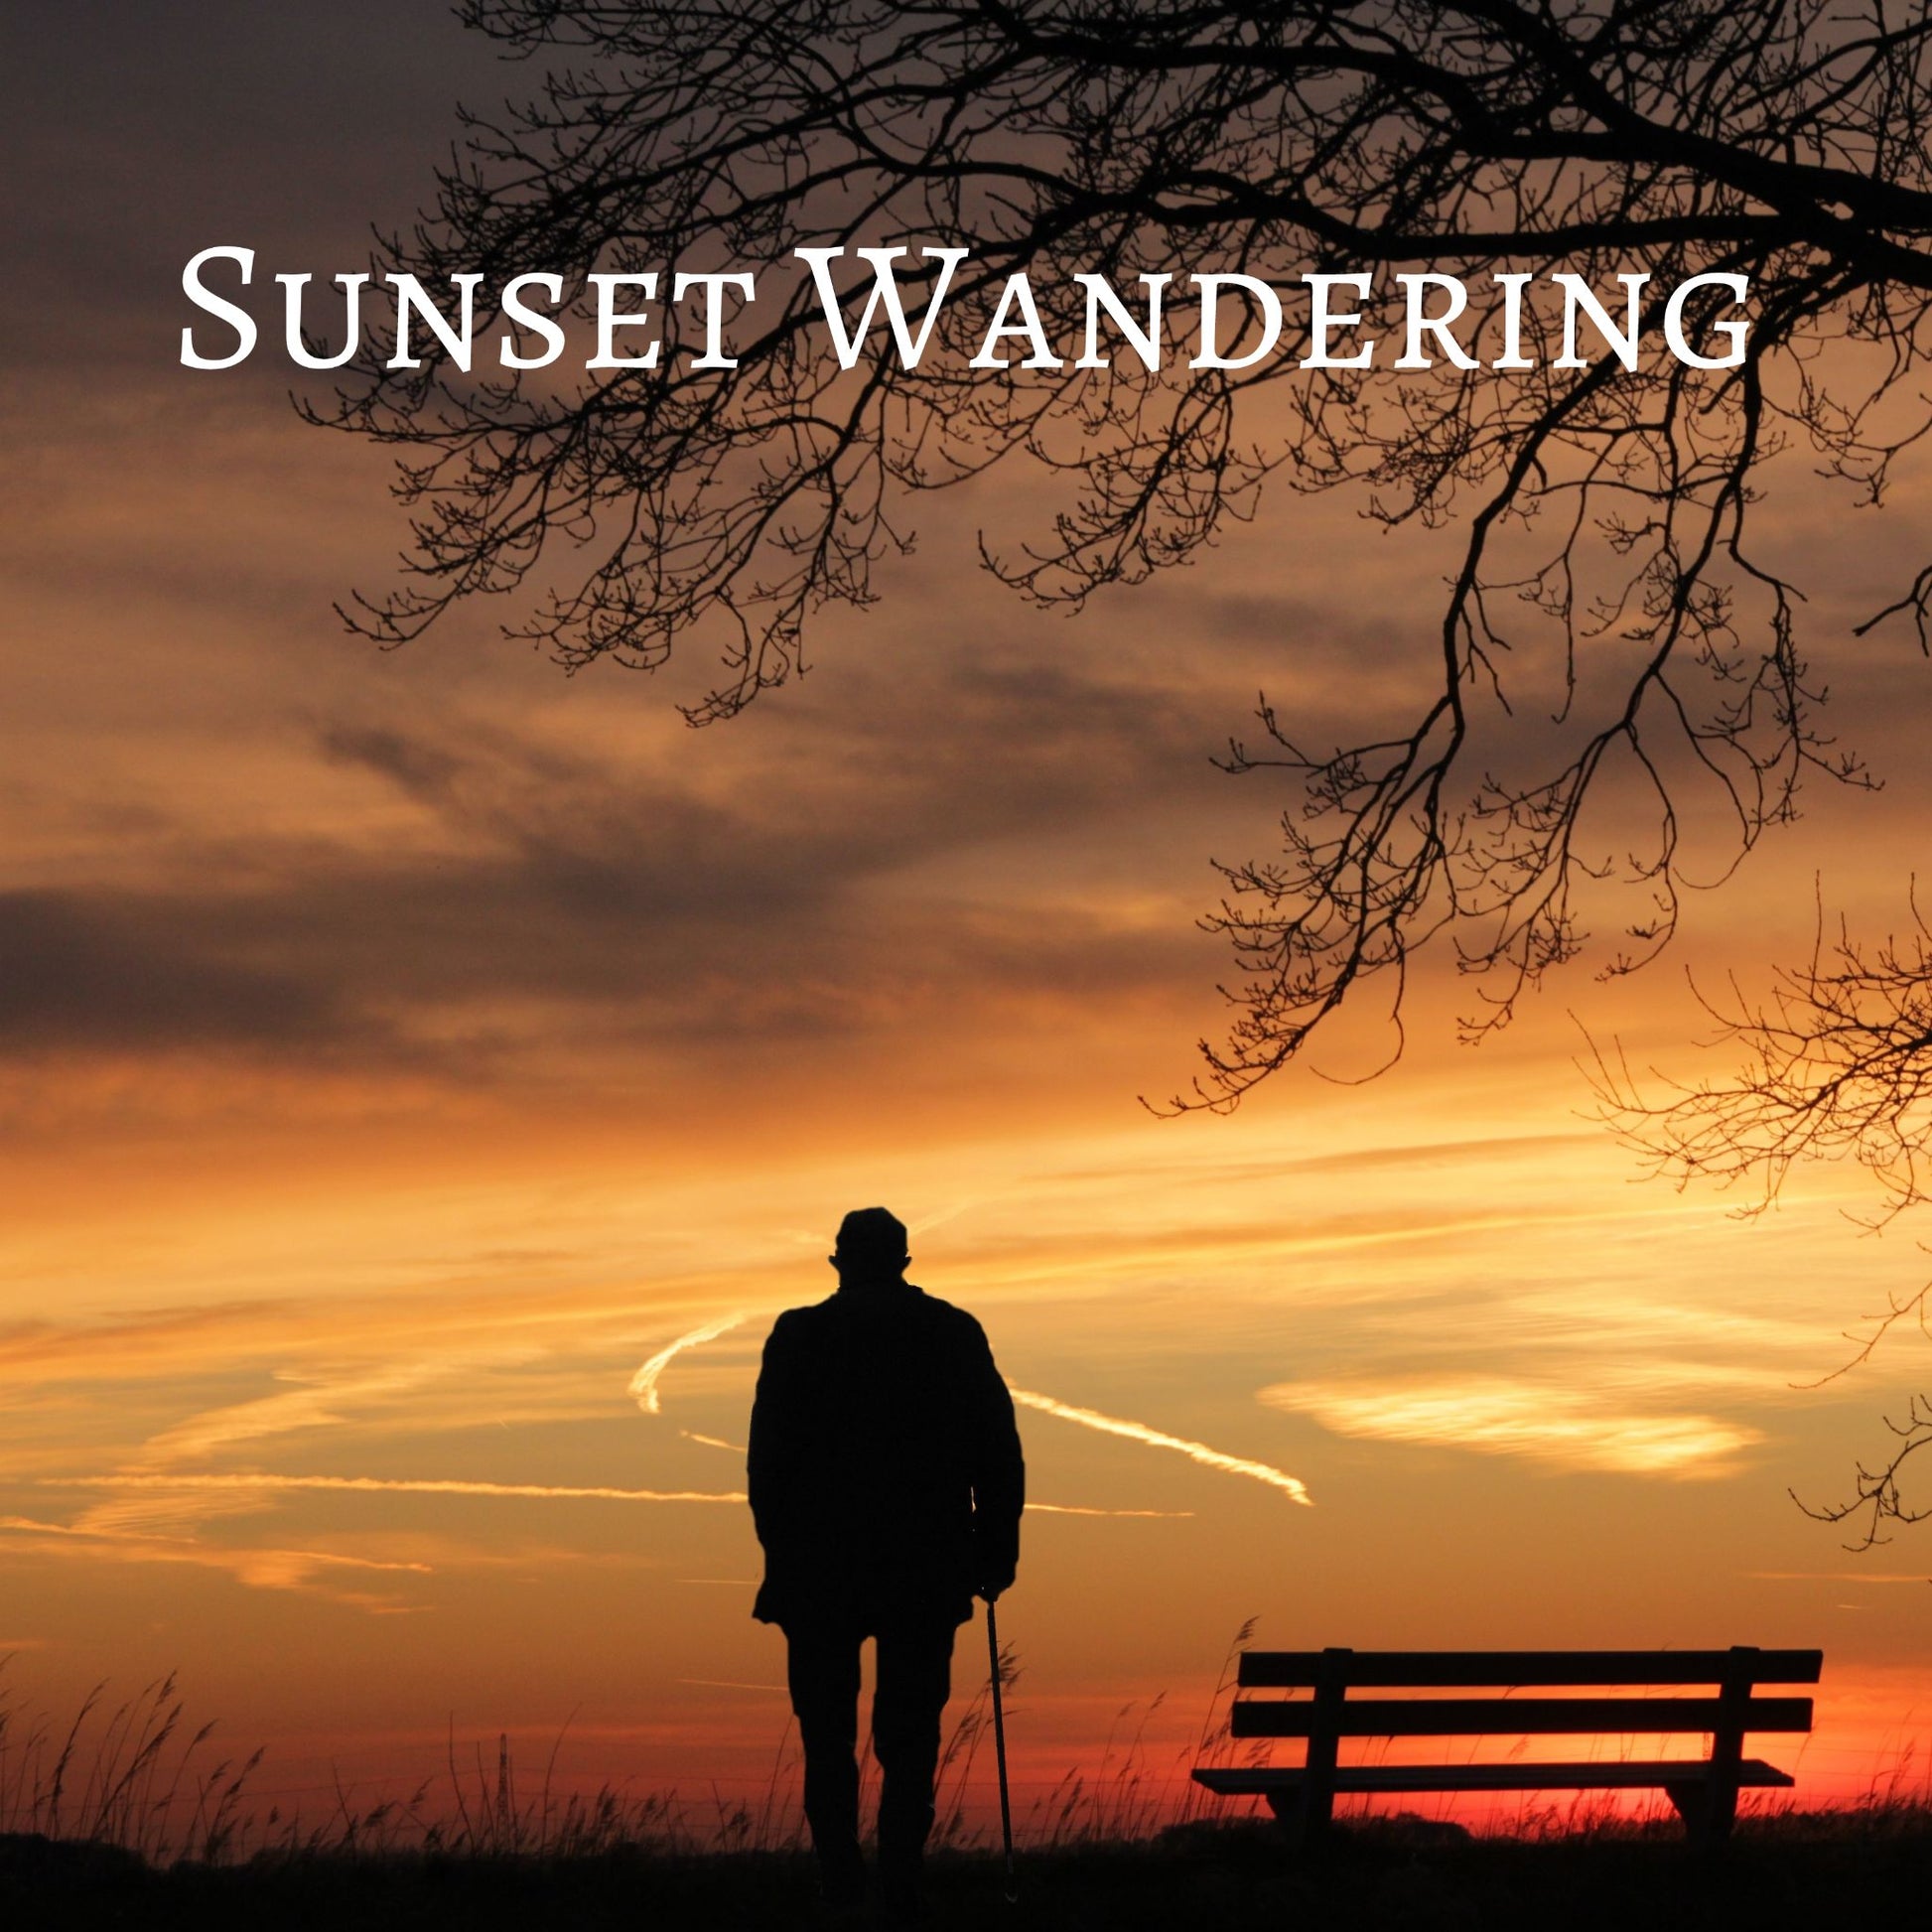 CD Cover of song Sunset Wandering